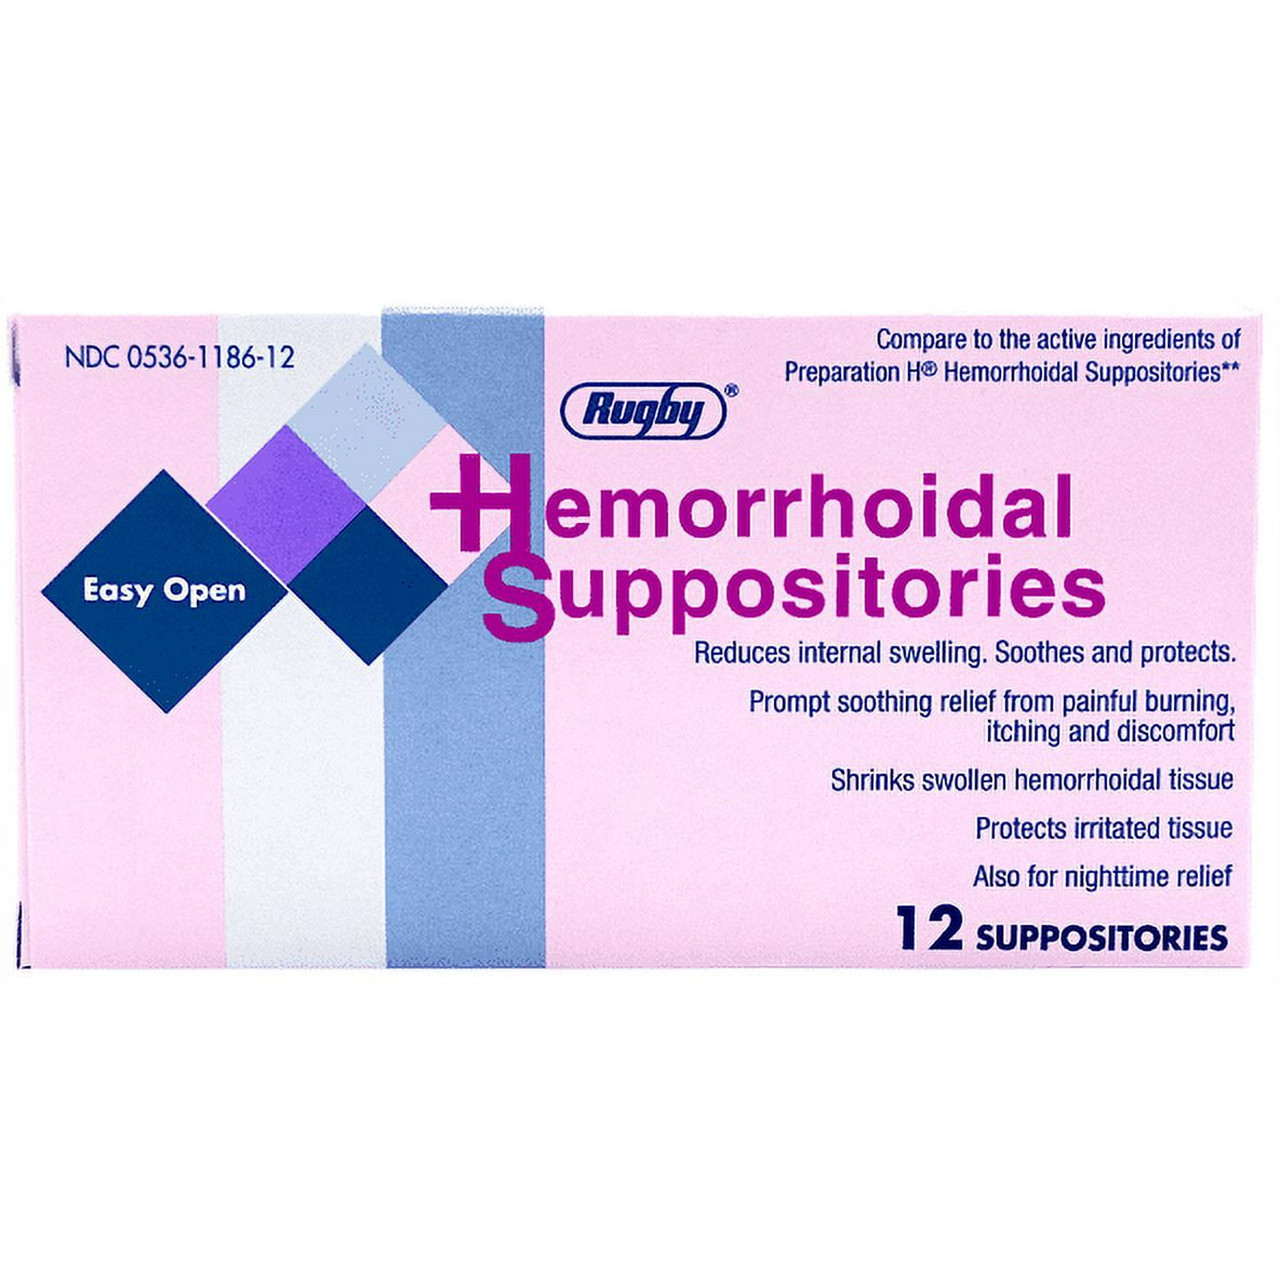 Calmol 4 Hemorrhoidal Suppositories 24 Each (Pack of 2)